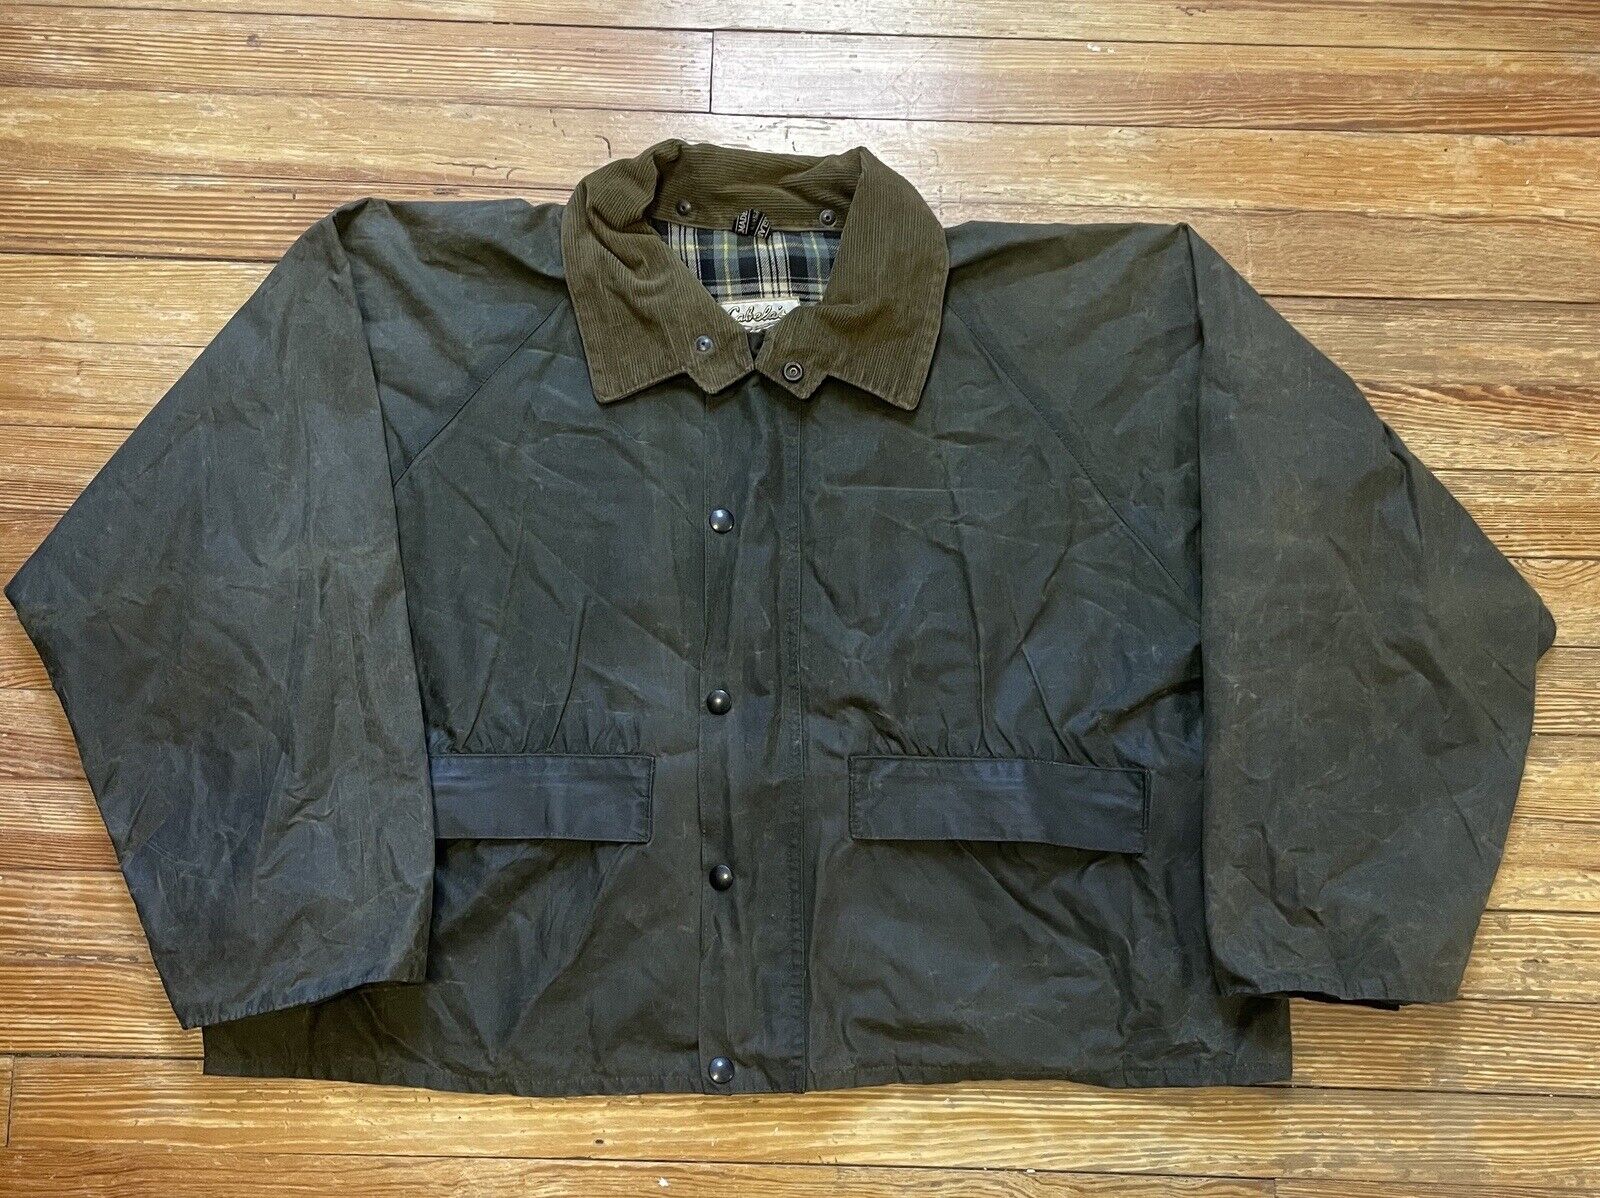 WTS: Classic Barbour wading jackets